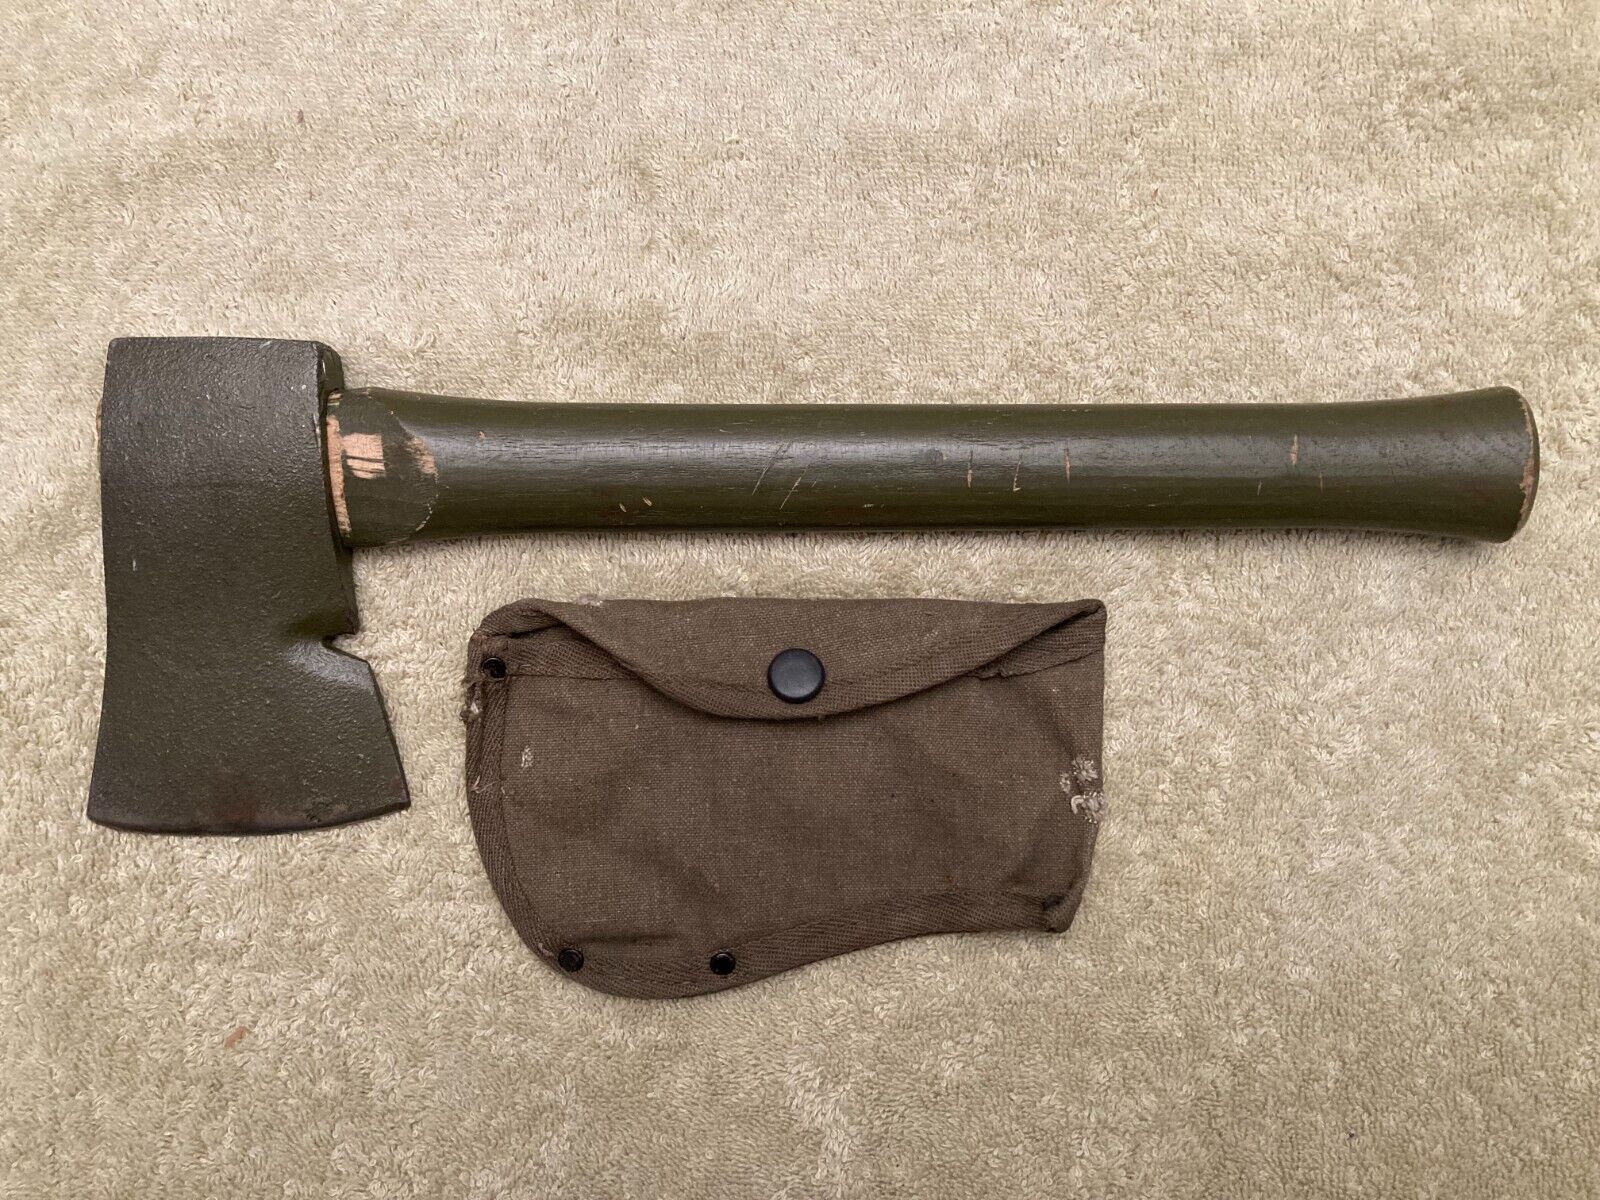 MILITARY STYLE VINTAGE GREEN AXE/HATCHET WITH SHEATH.